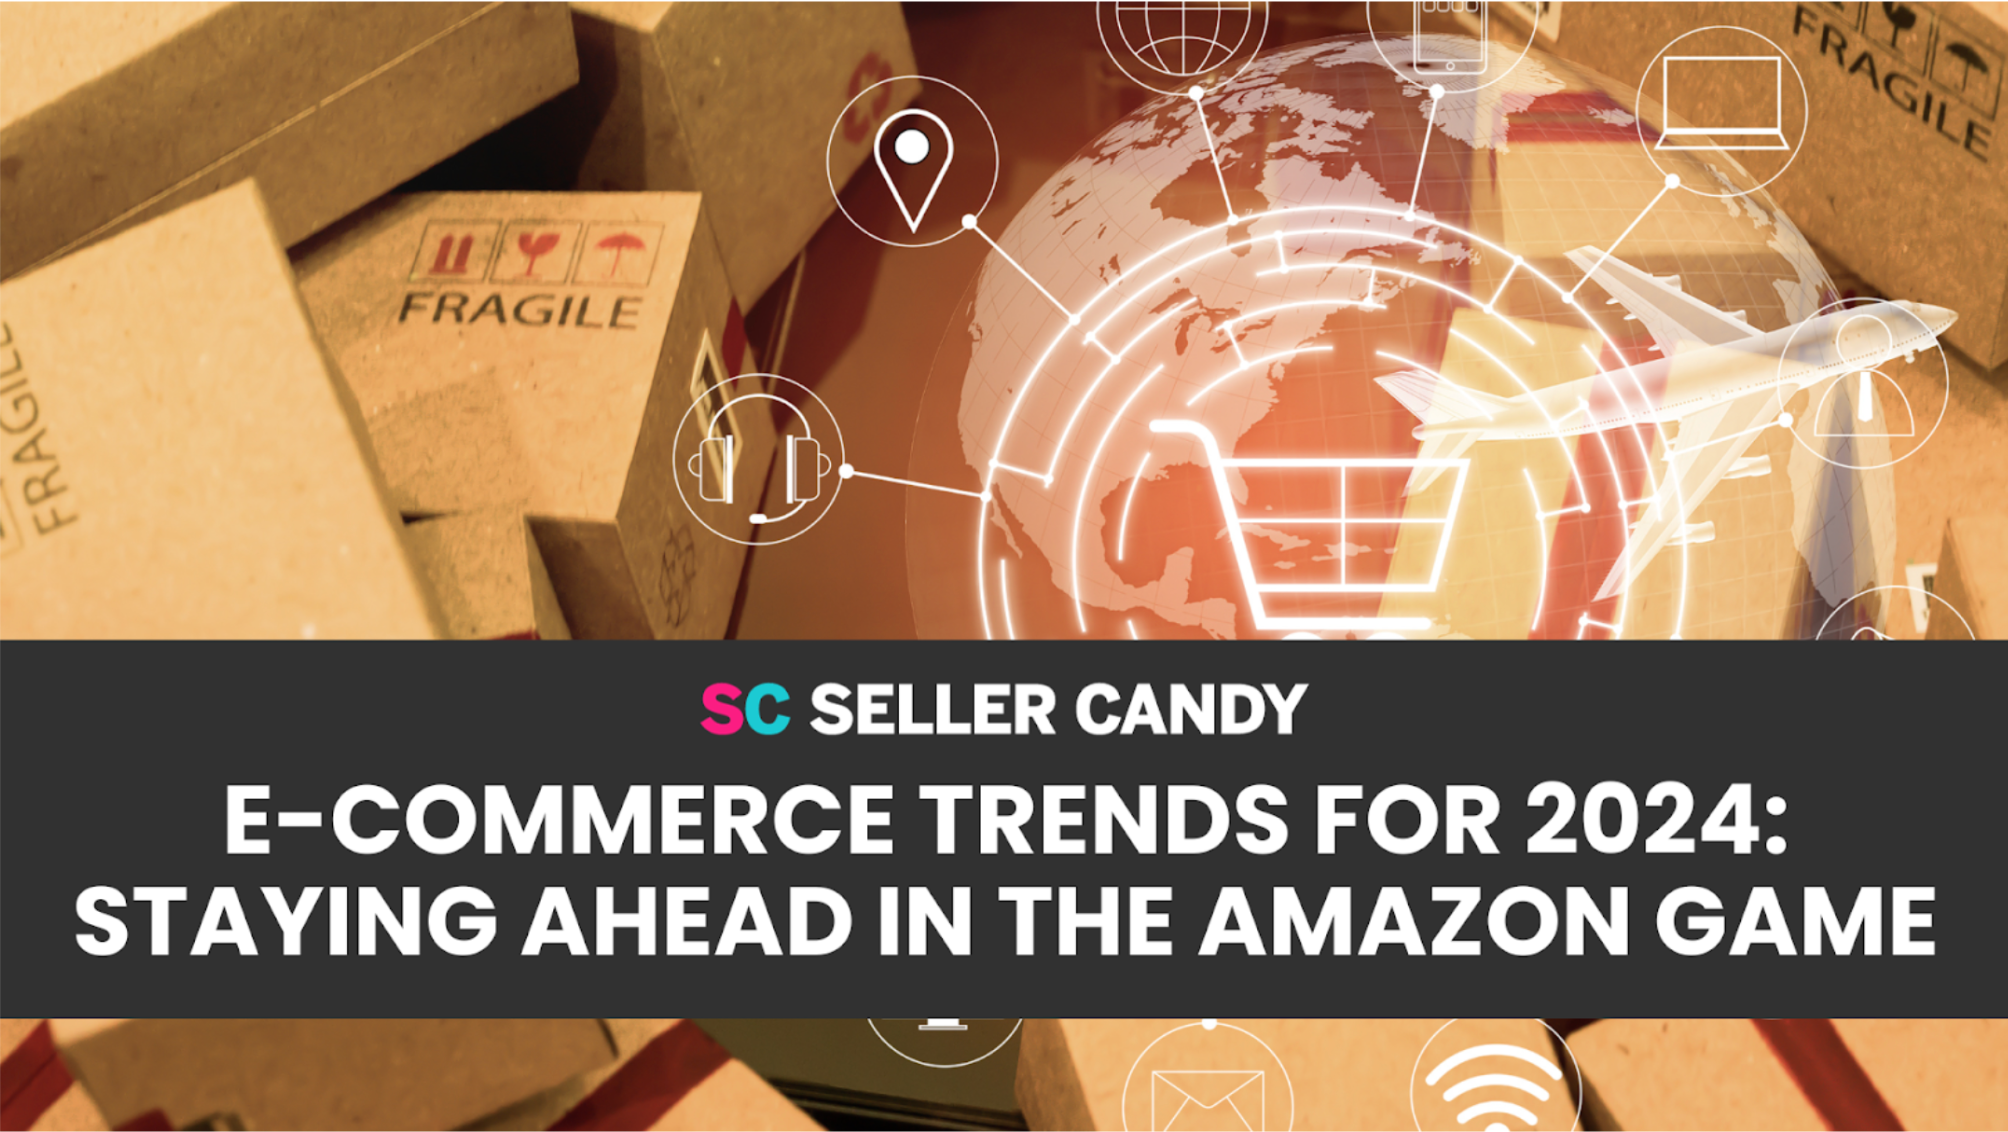 E-commerce Trends for 2024: Staying Ahead in the Amazon Game